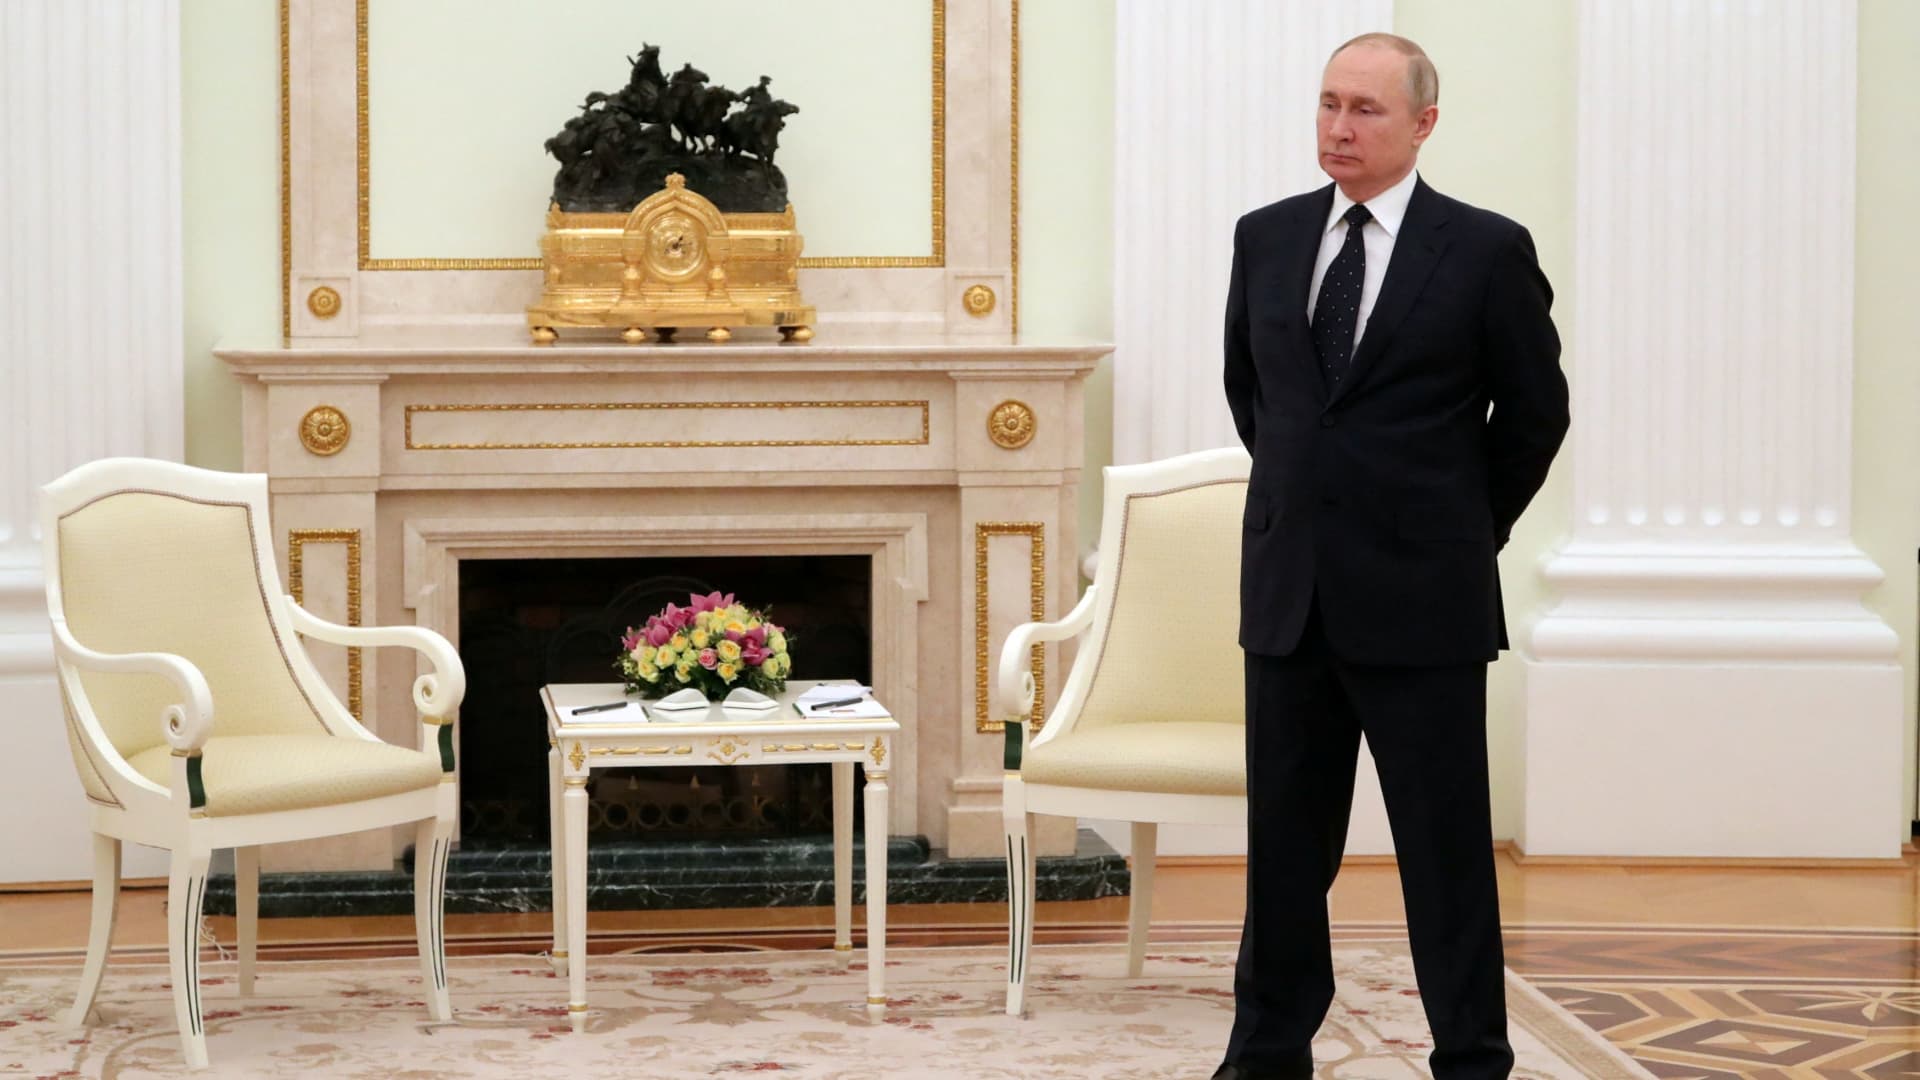 Russian President Vladimir Putin looks on before a meeting with Belarusian President Alexander Lukashenko at the Kremlin in Moscow, Russia March 11, 2022.